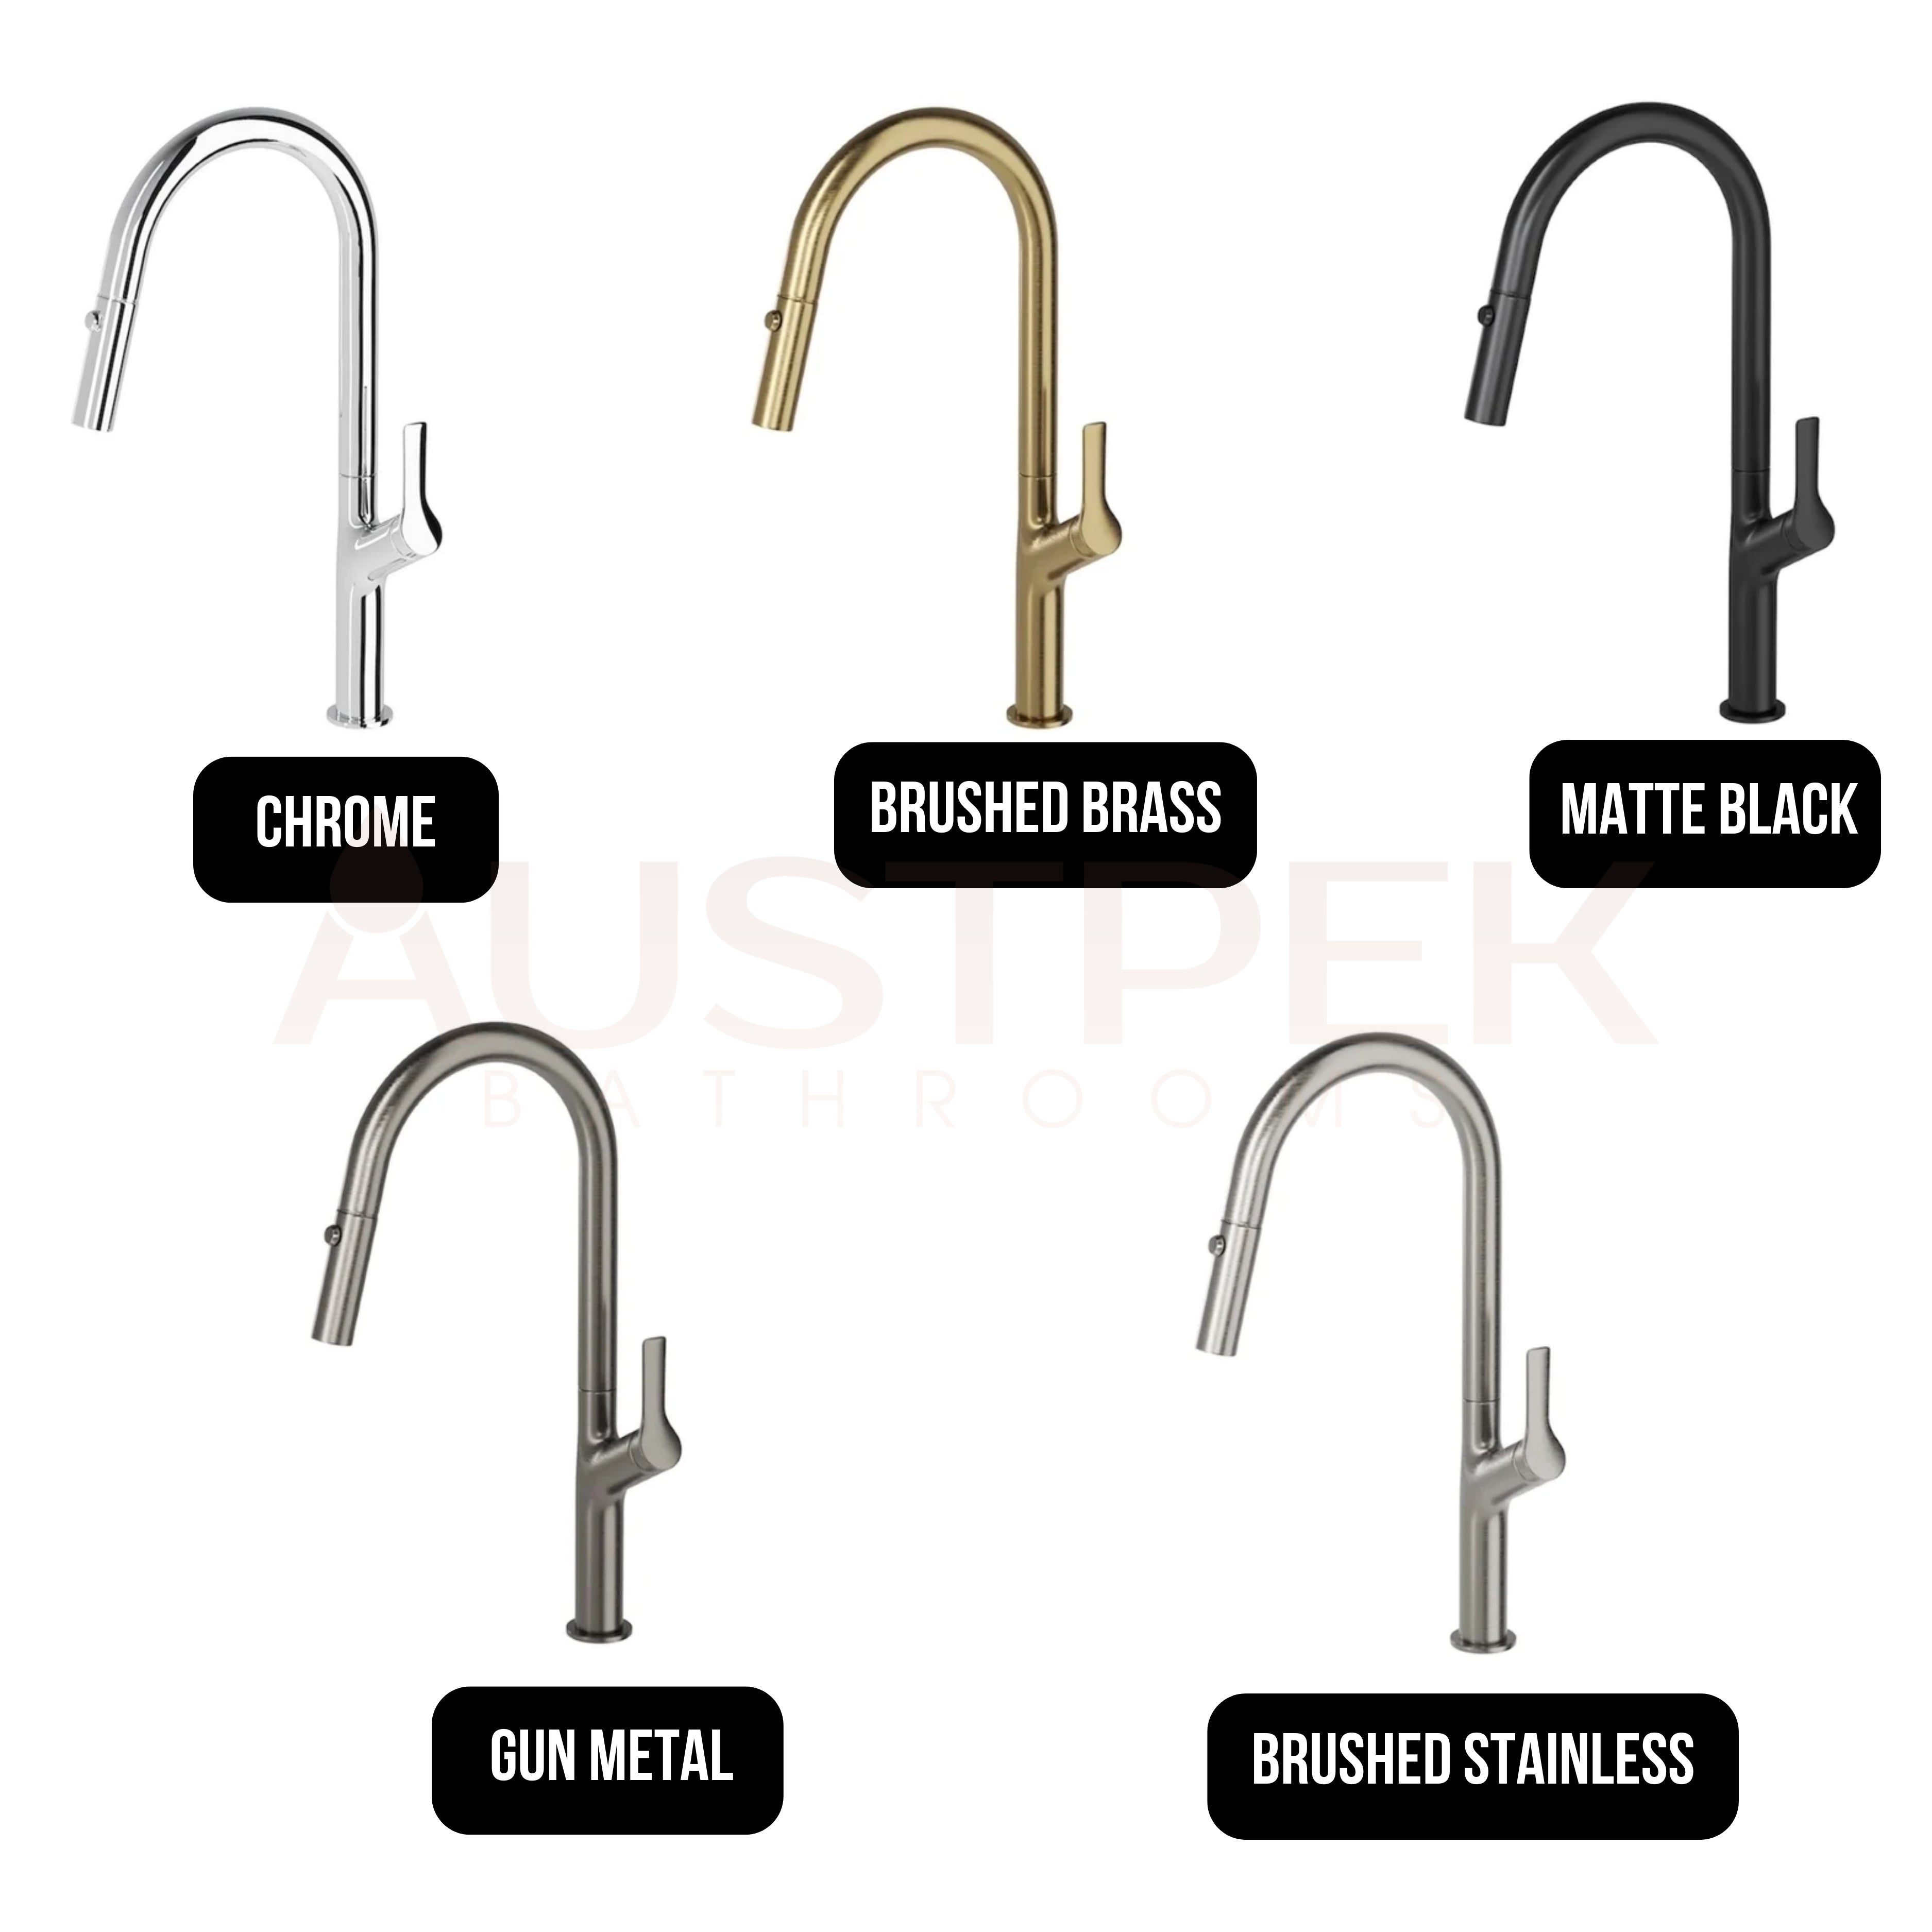 LINSOL TISH 25MM PULL-OUT SINK MIXER BRUSHED STAINLESS